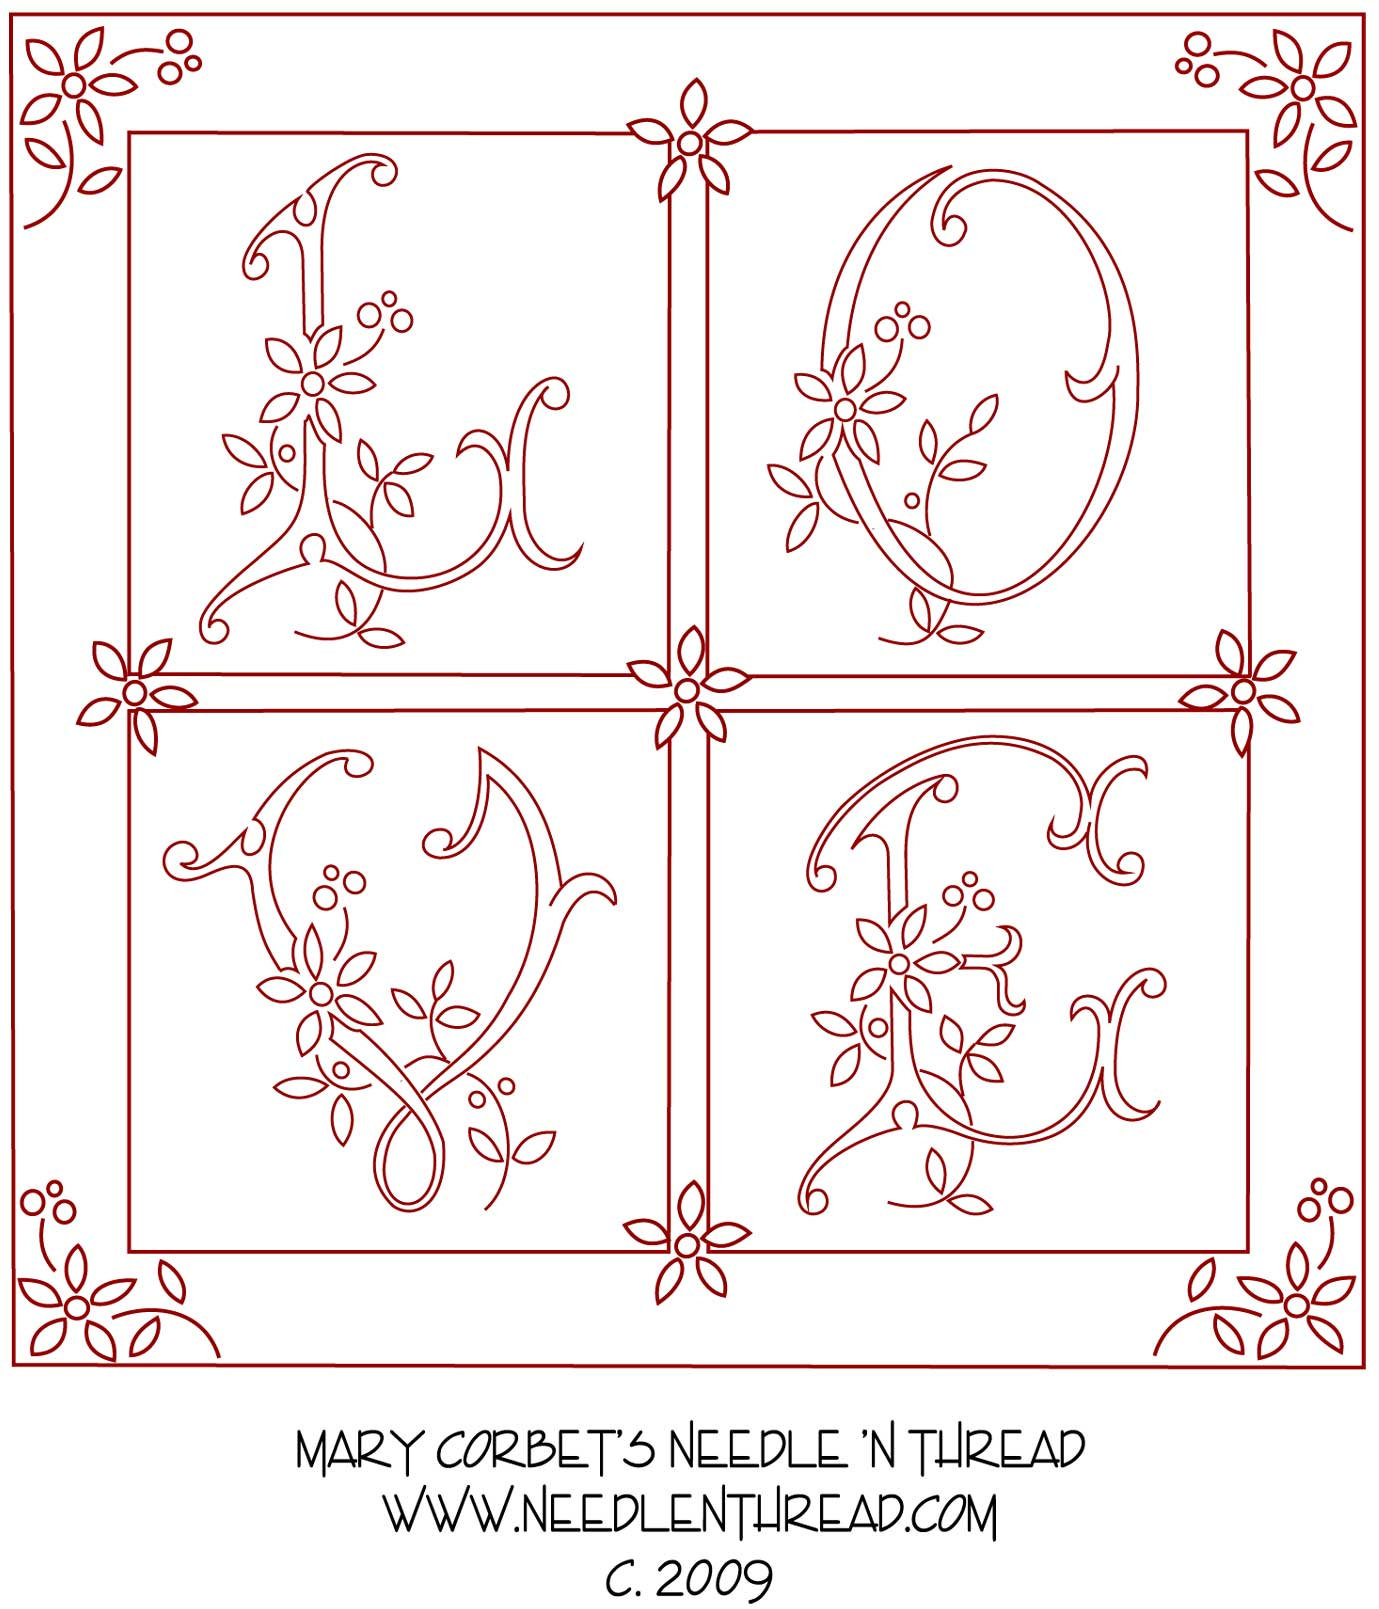 Free Embroidery Designs Patterns A More Complex Hand Embroidery Pattern Psuedo Original Love